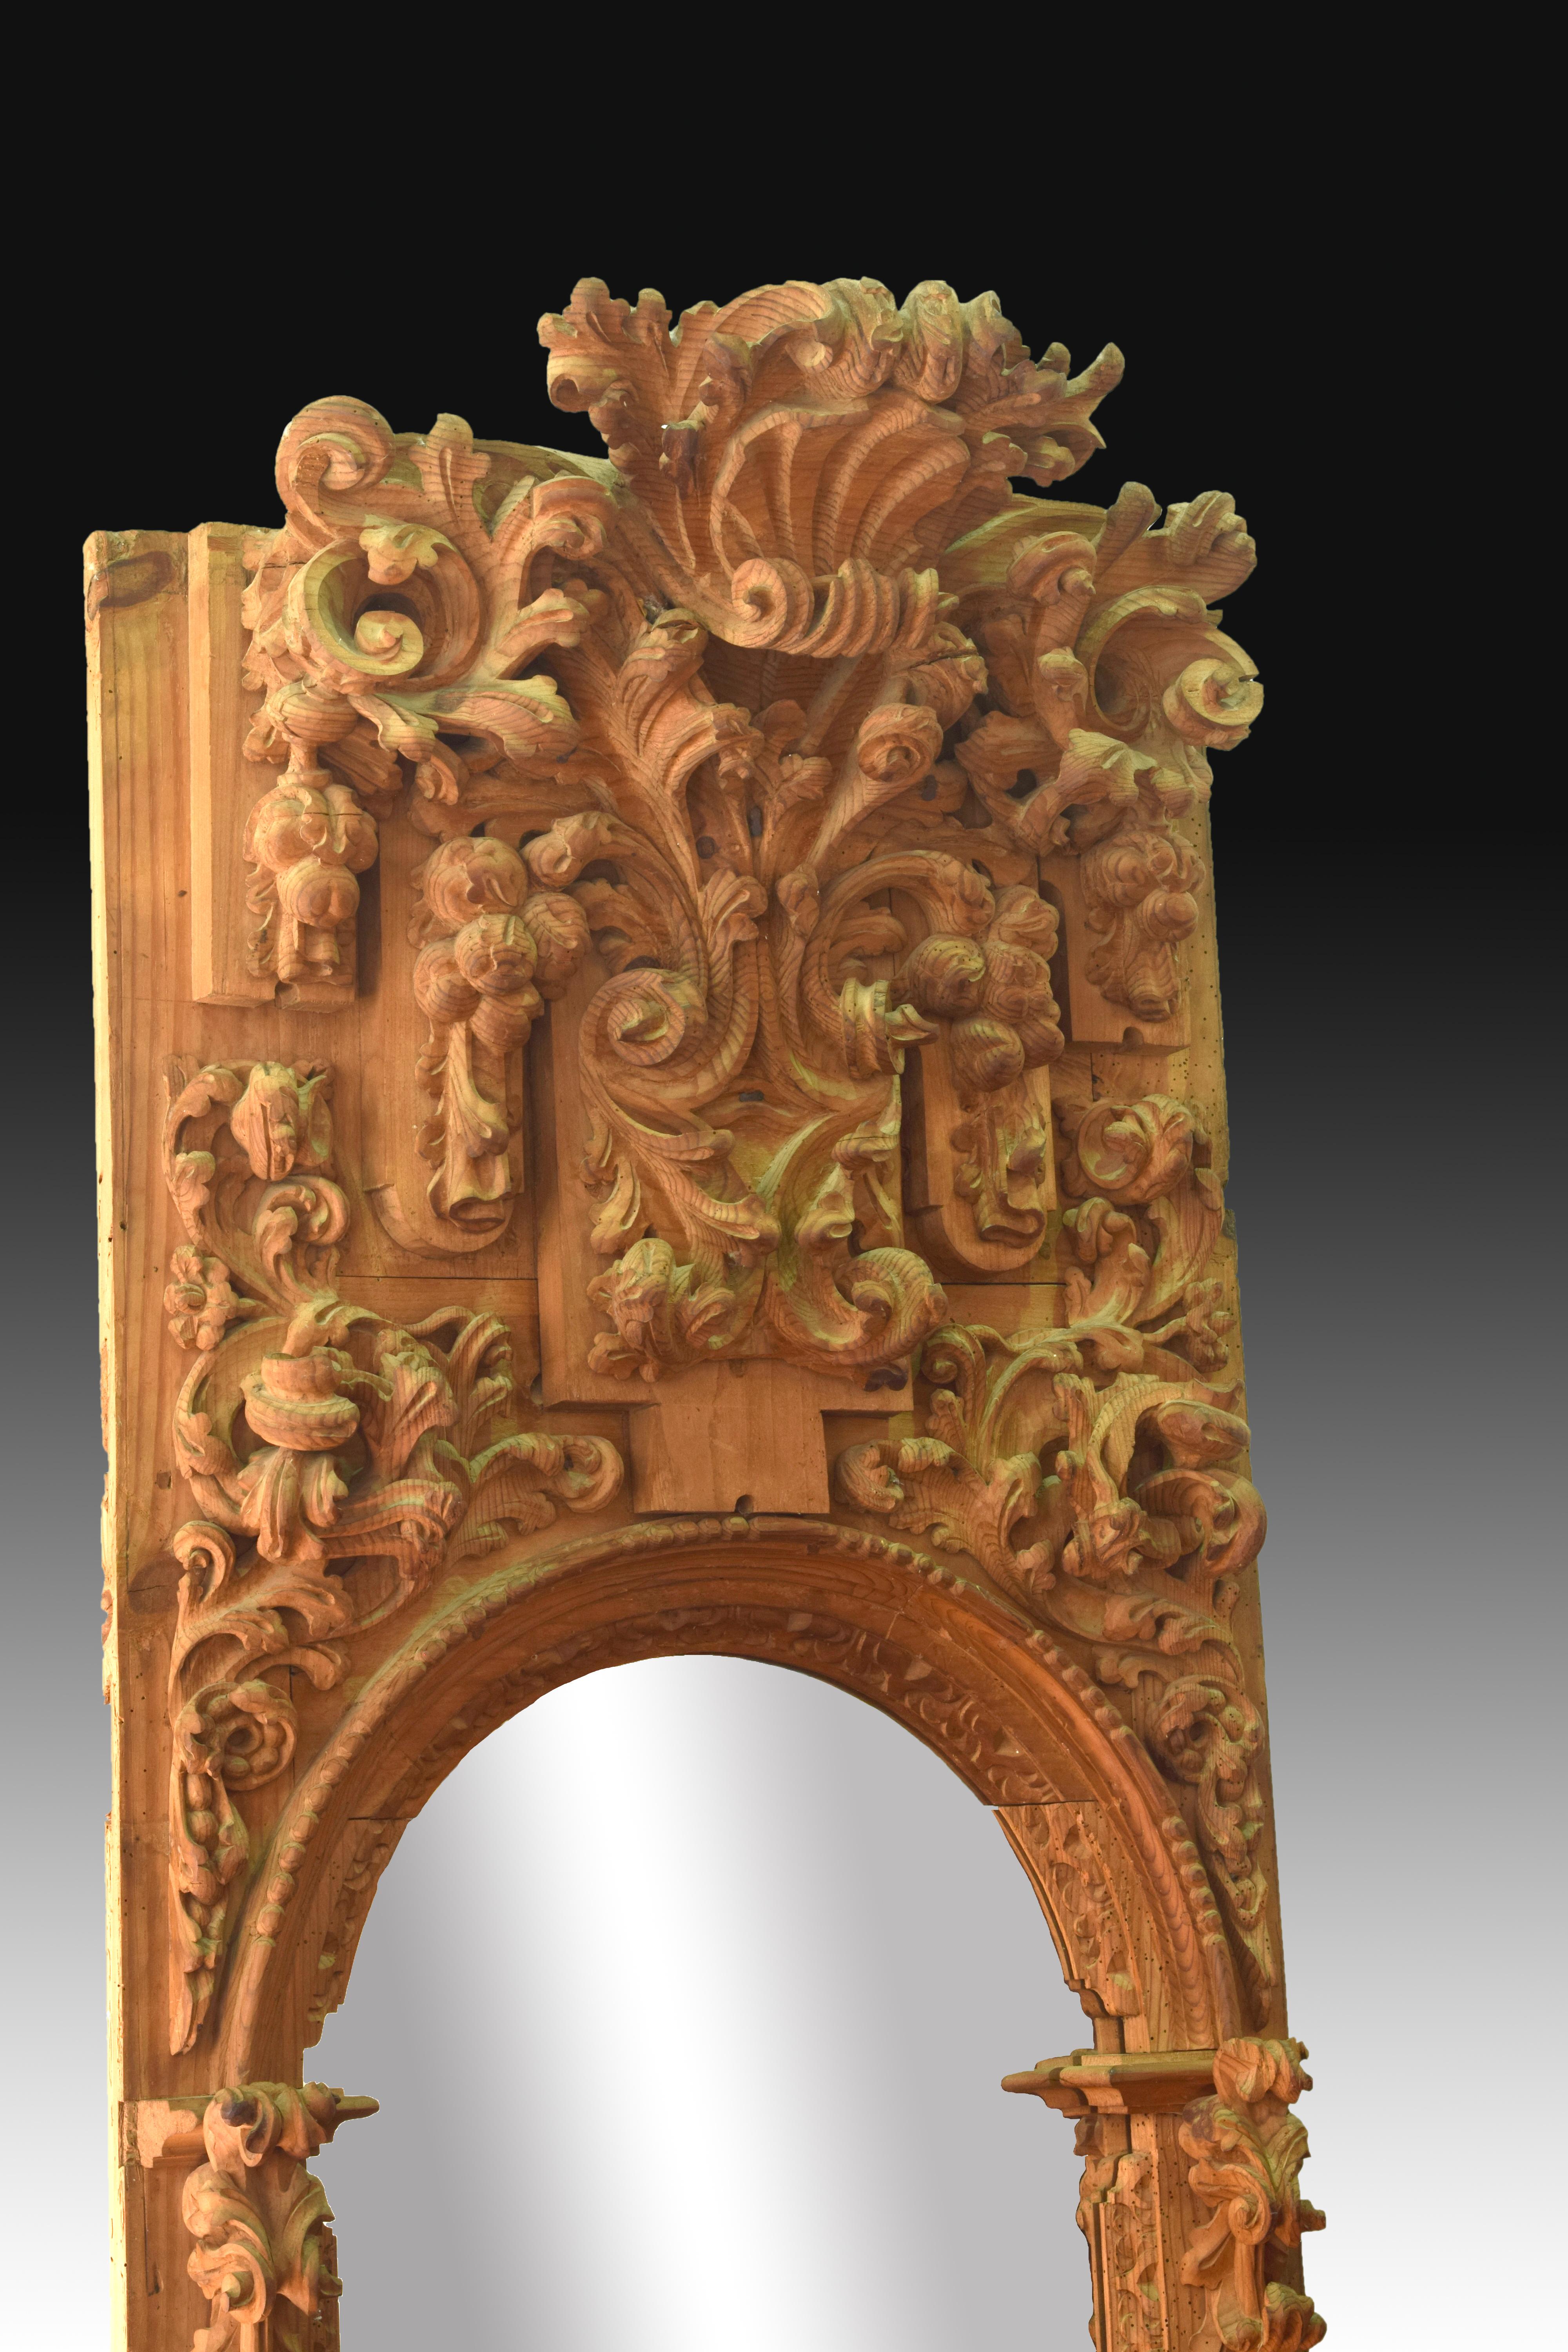 Pair of altar fragments or niches made of carved pine wood that are decorated with a series of important carvings with lots of plant-themed volume, scrolls, ropes, architectural details, cloths, etc., arranged symmetrically around the arch of half a